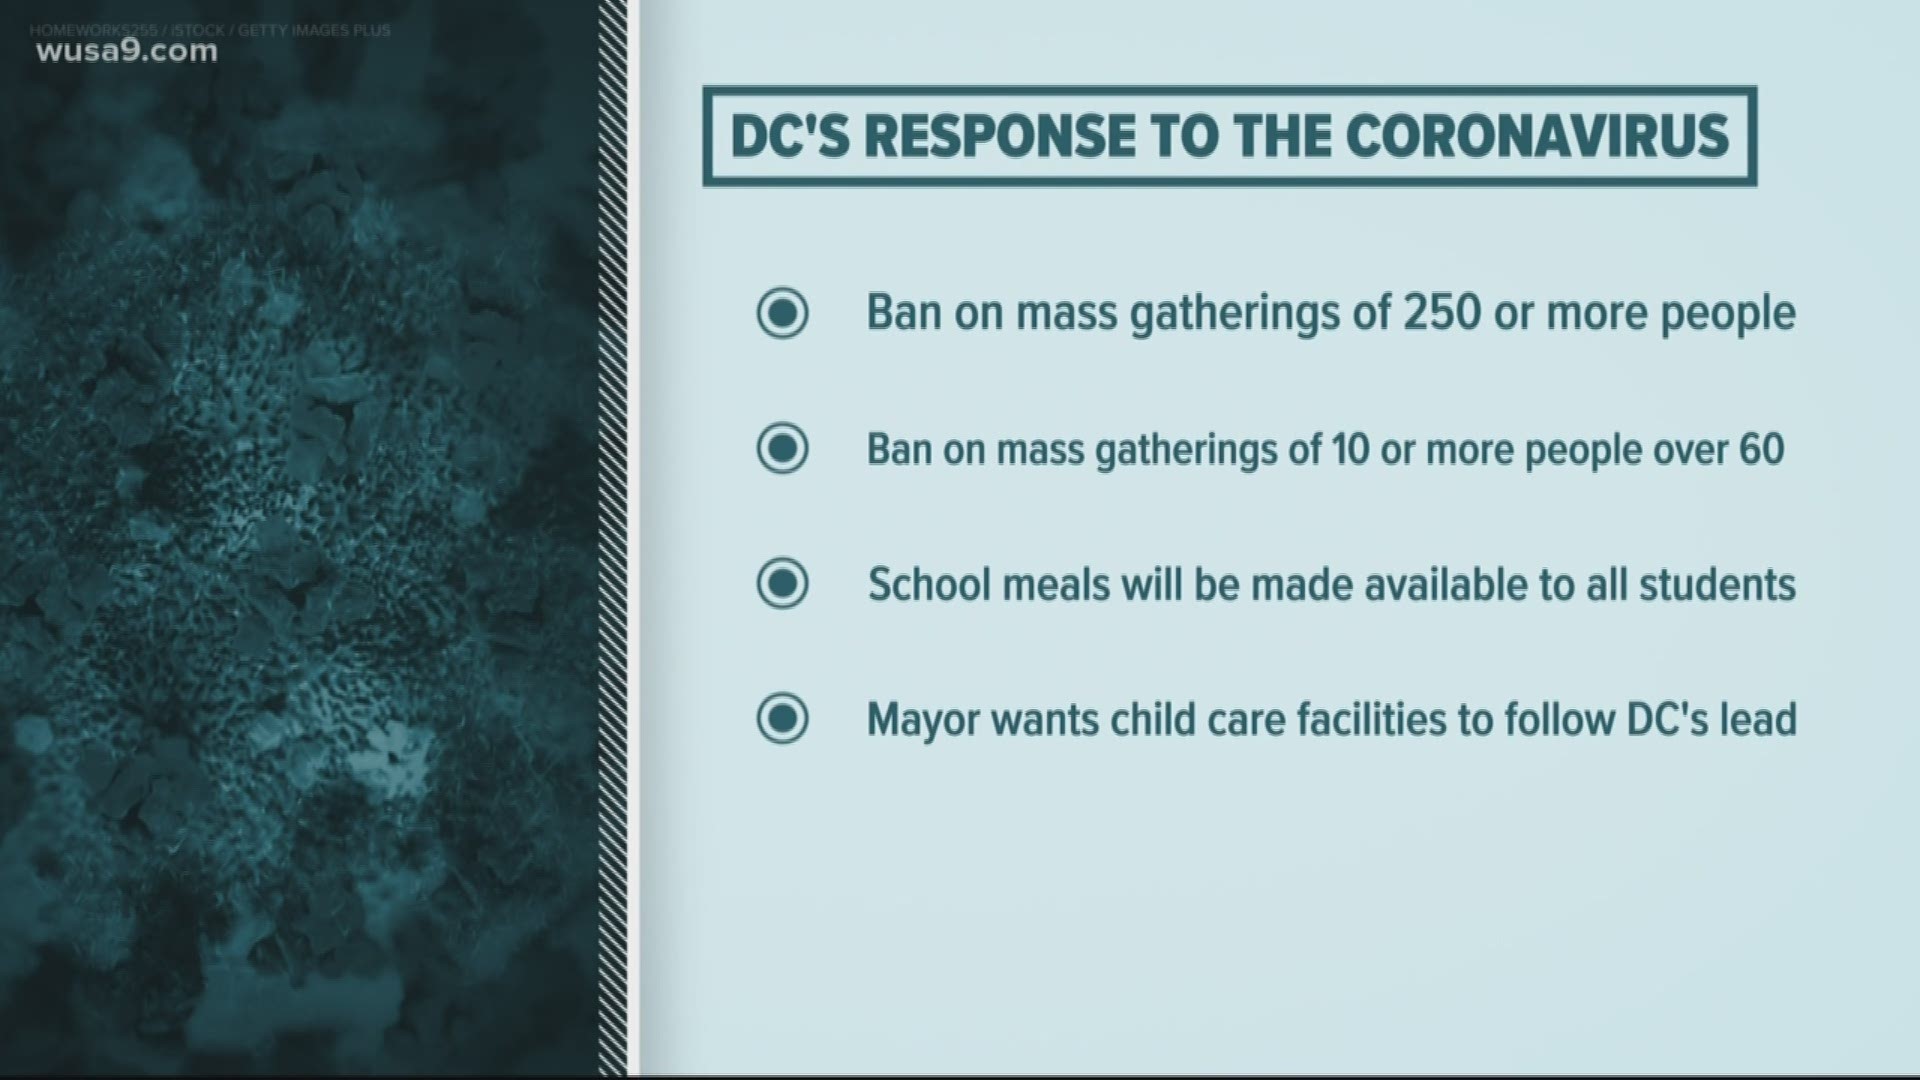 The coronavirus has made an impact around the DMV, with cases increasing. Here are your live updates for D.C.